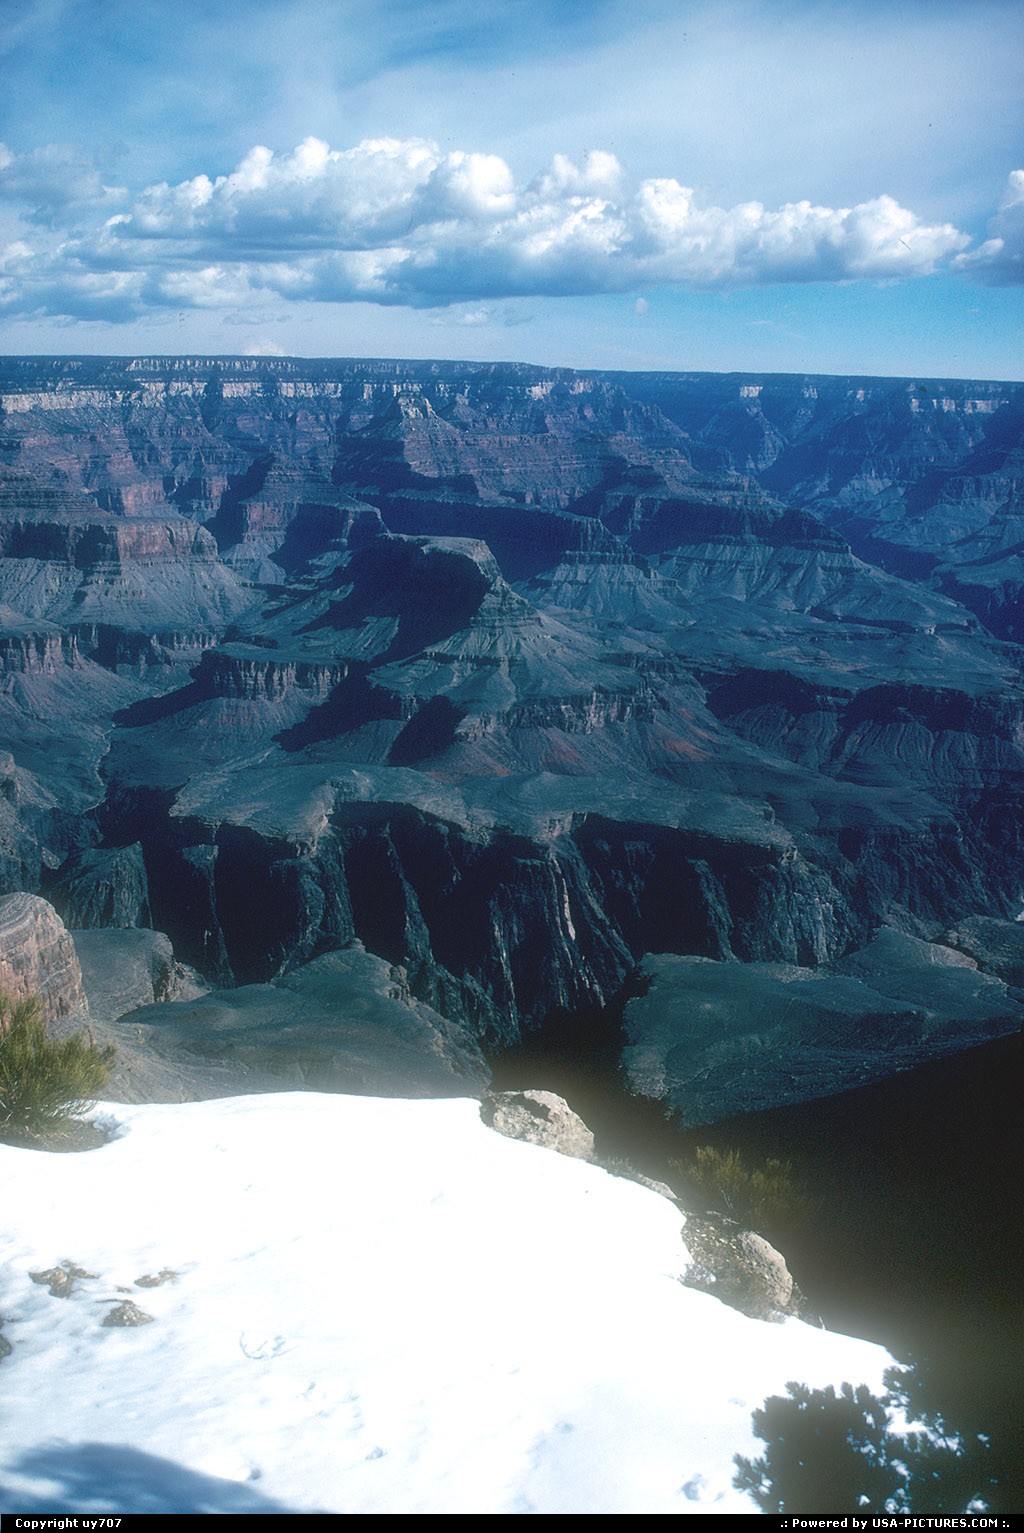 Picture by uy707:  Arizona Grand Canyon  